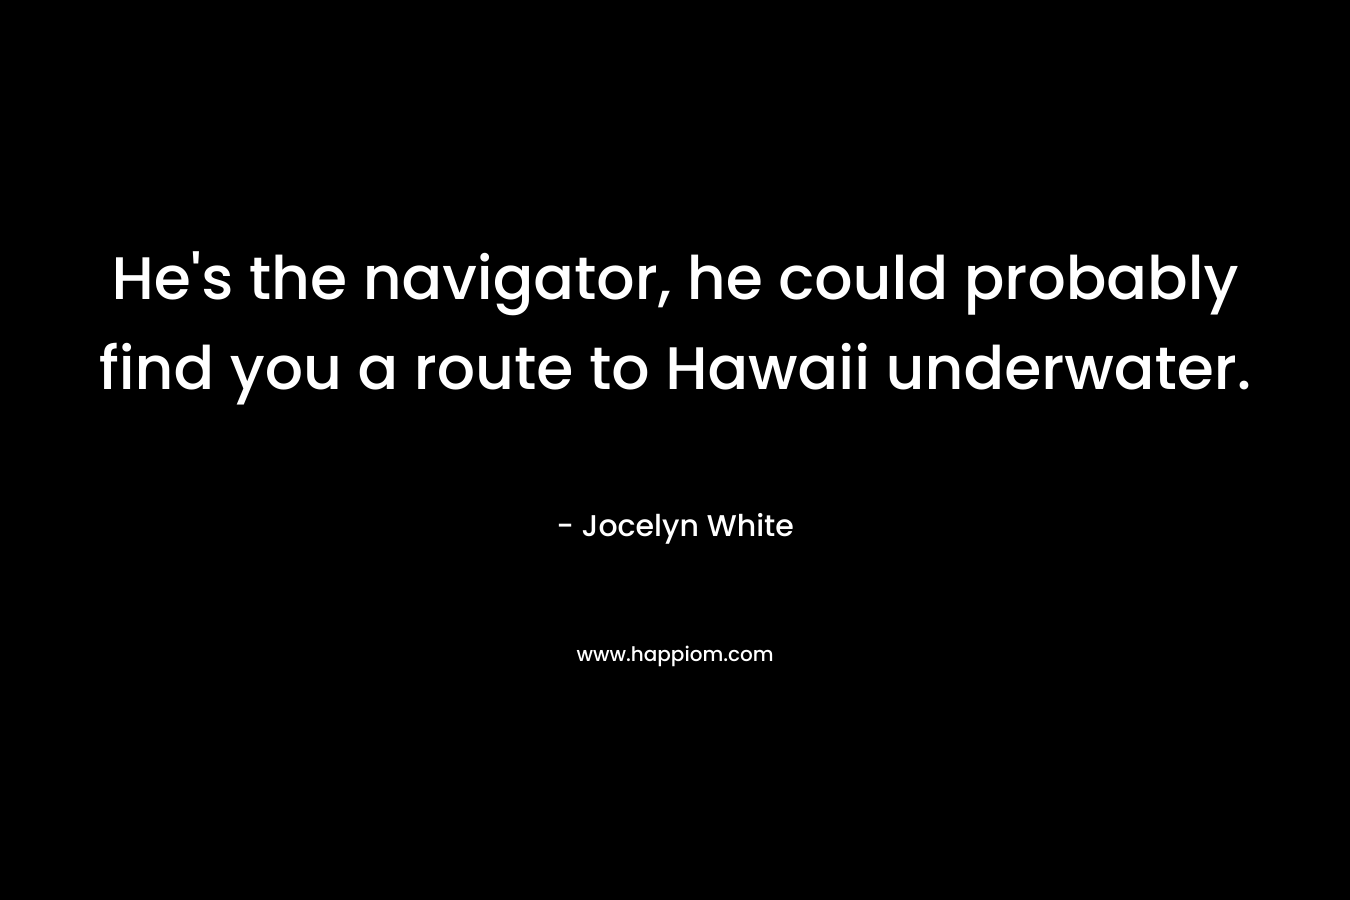 He’s the navigator, he could probably find you a route to Hawaii underwater. – Jocelyn White